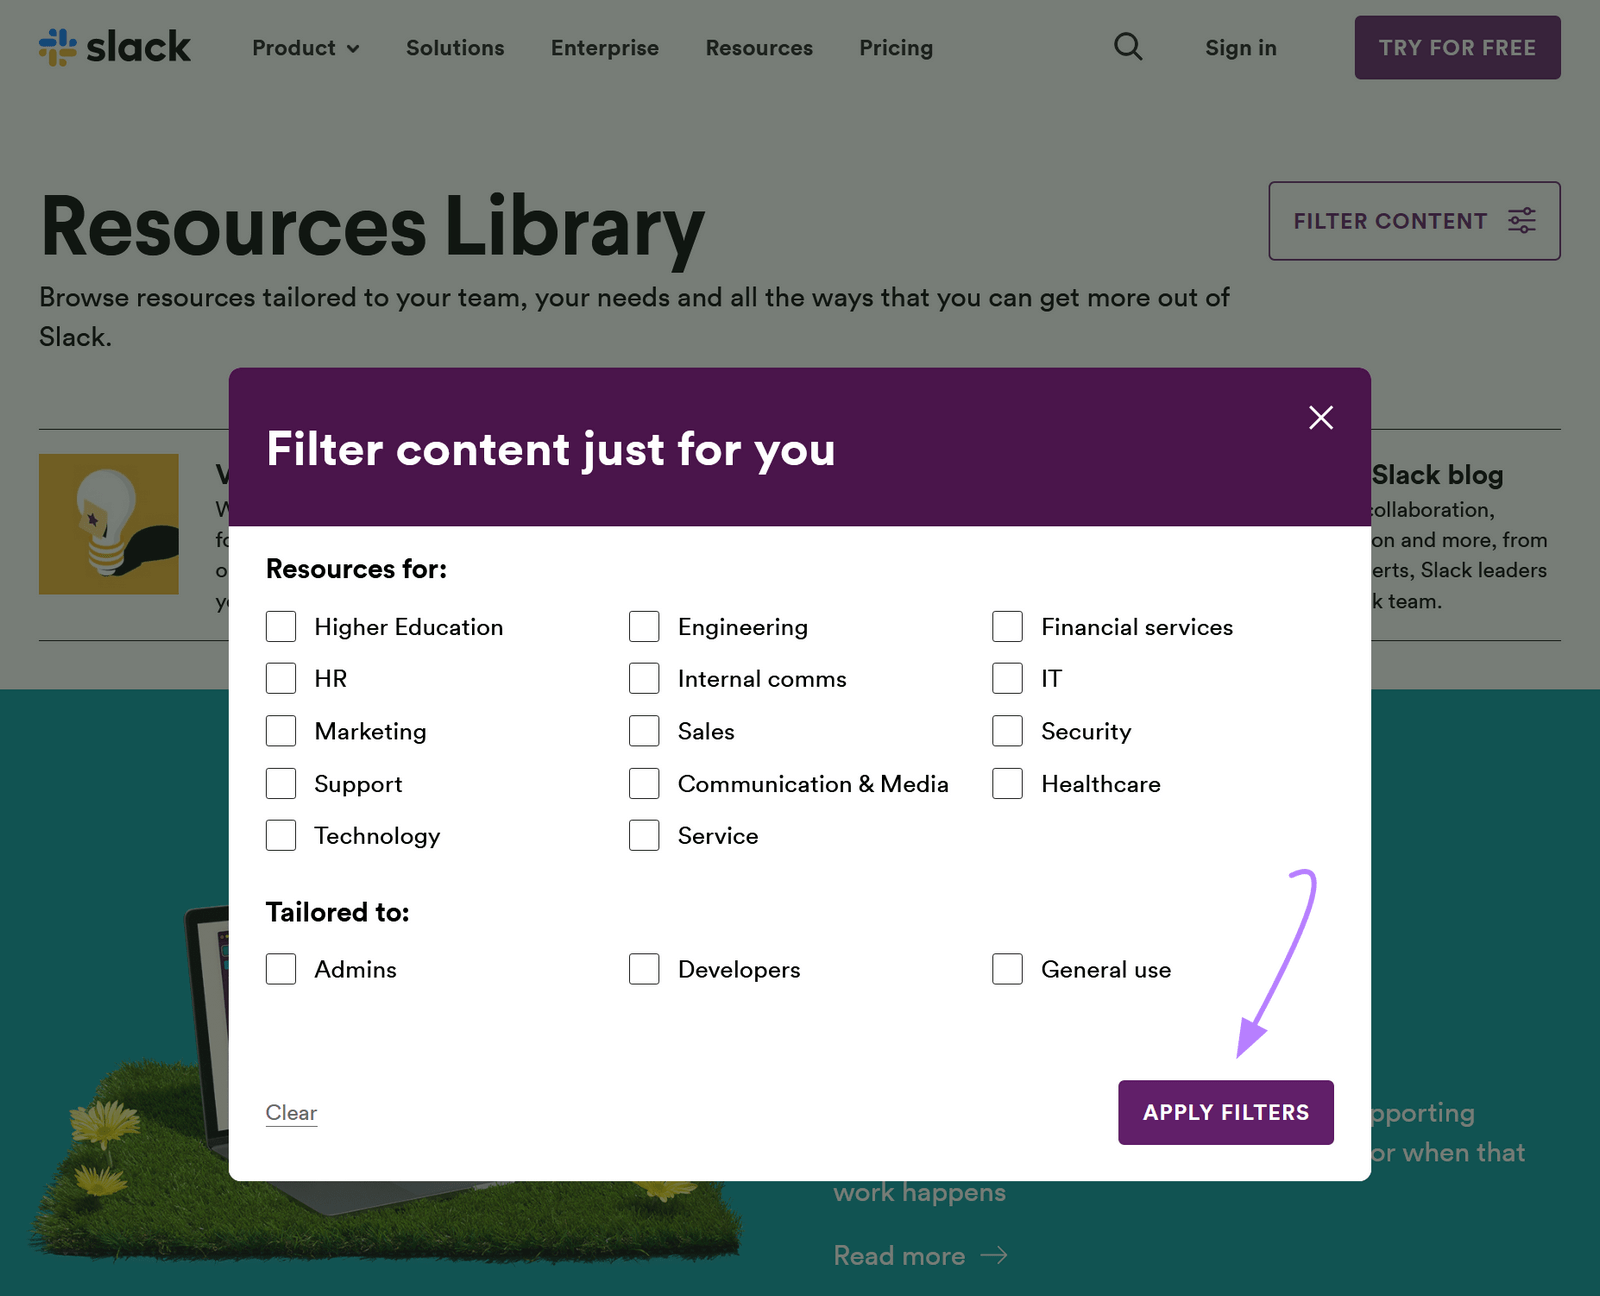 Slack's Resource Library content filters based on industry and audience persona